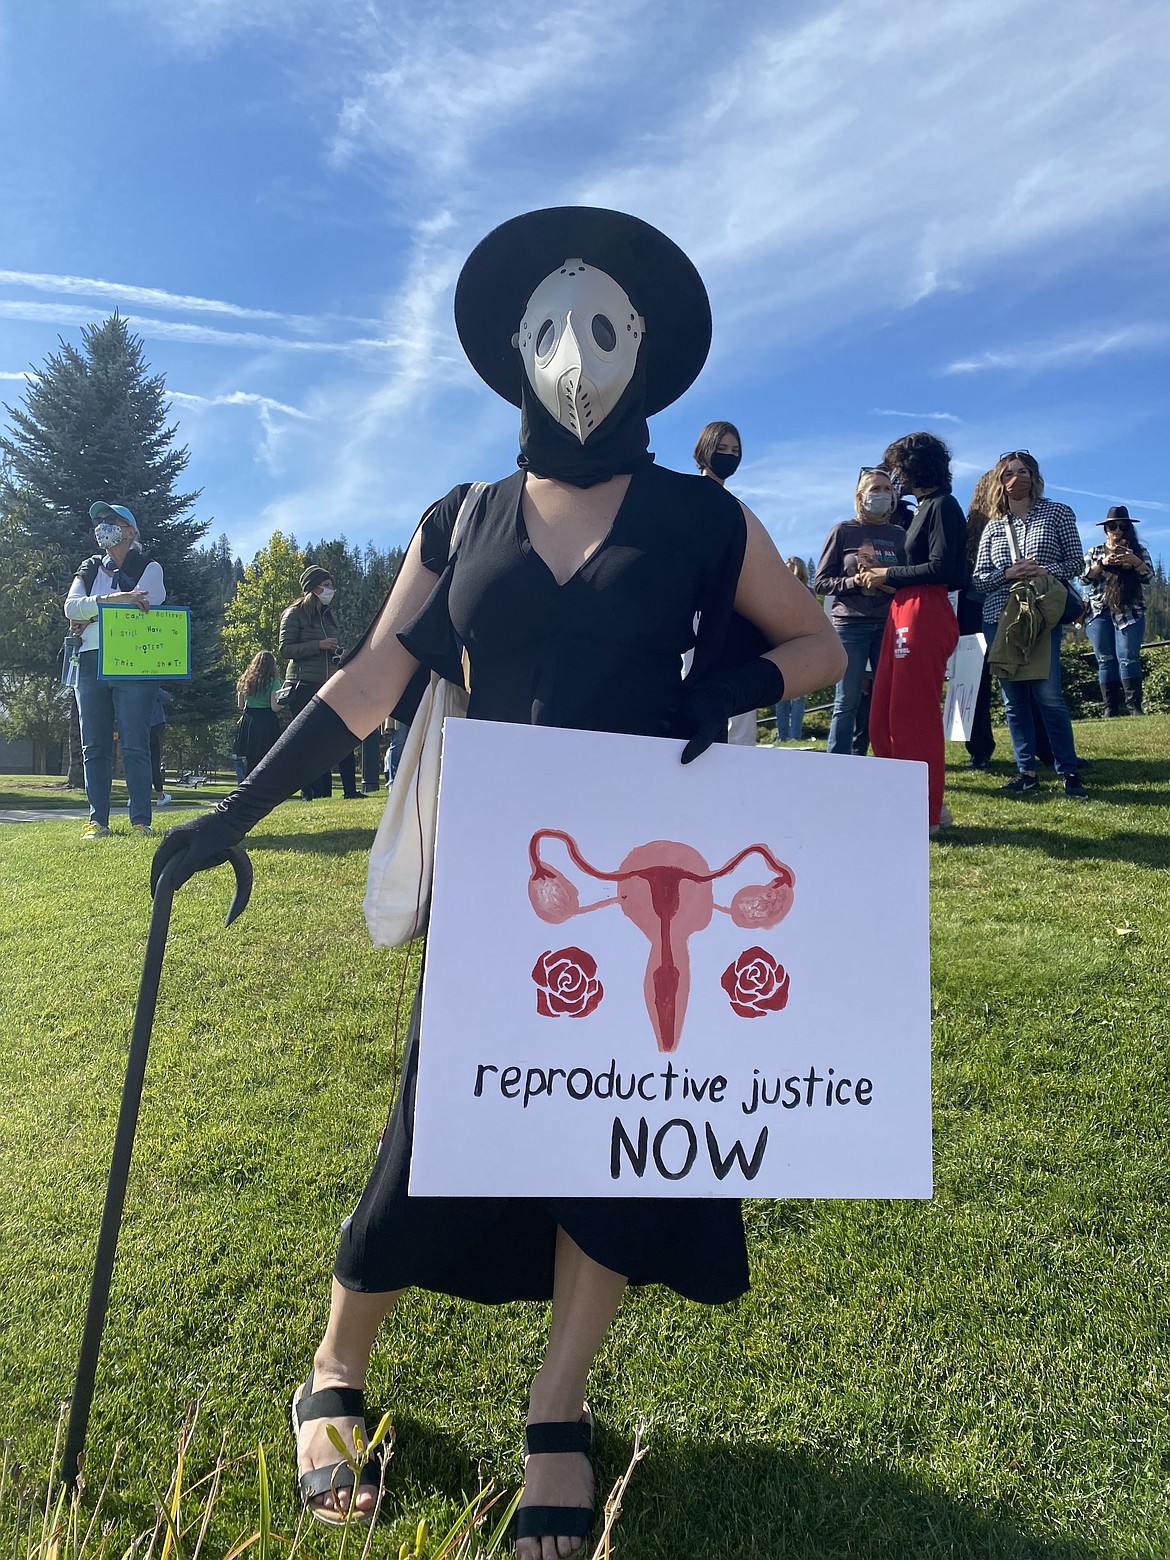 Originating from Coeur d'Alene, Nadia Hitchcock traveled to attend the Kootenai Women's March Saturday to stand up for women's reproductive freedom and justice.